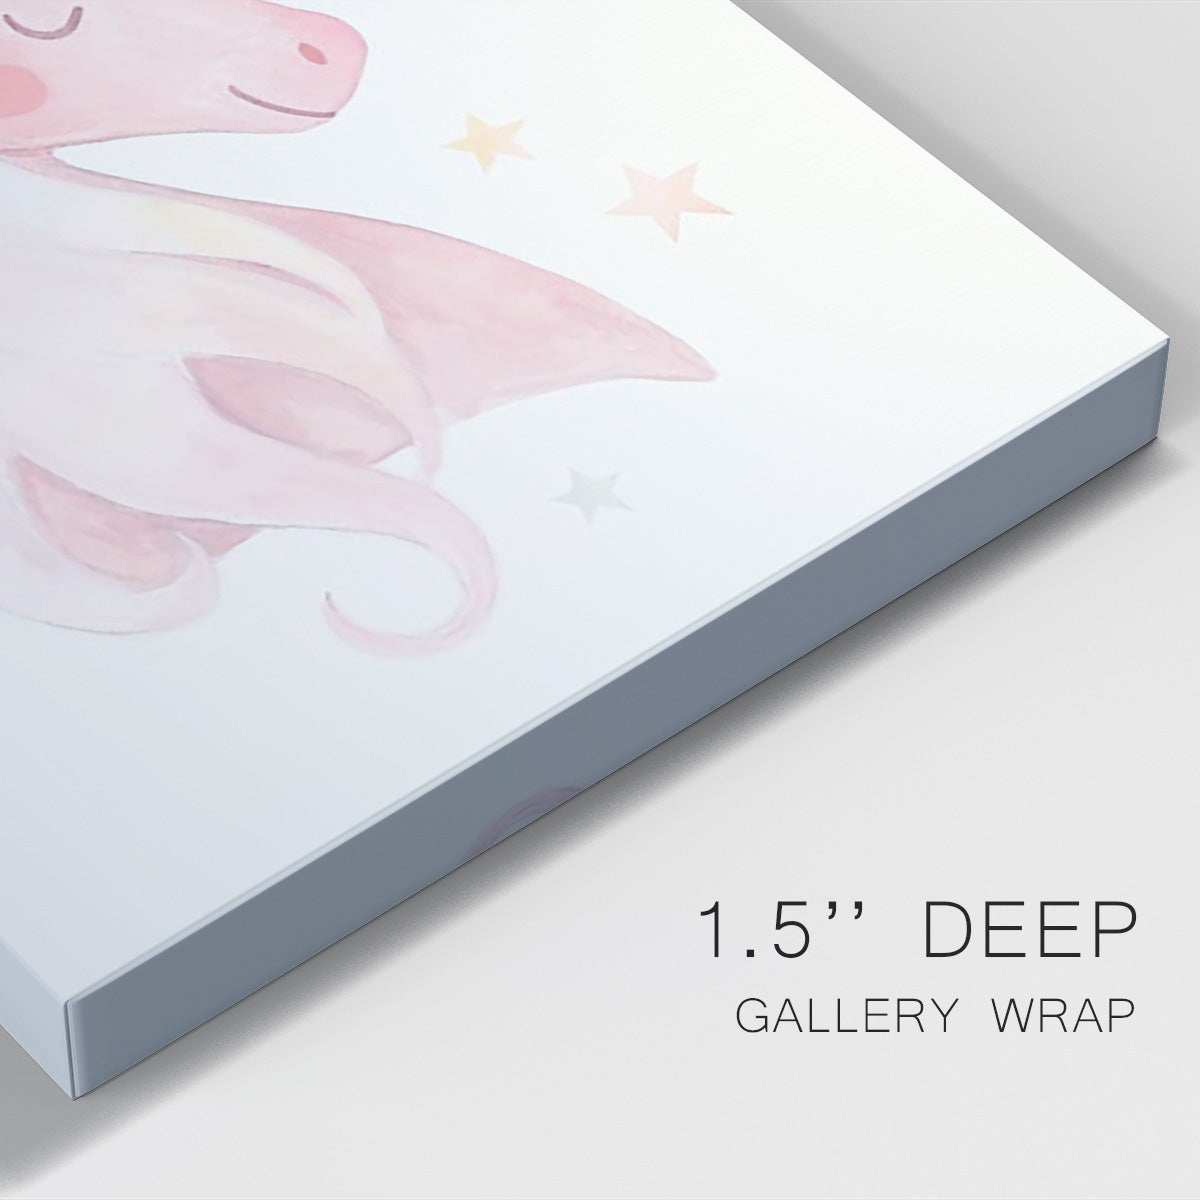 Sweet Unicorn II Premium Gallery Wrapped Canvas - Ready to Hang